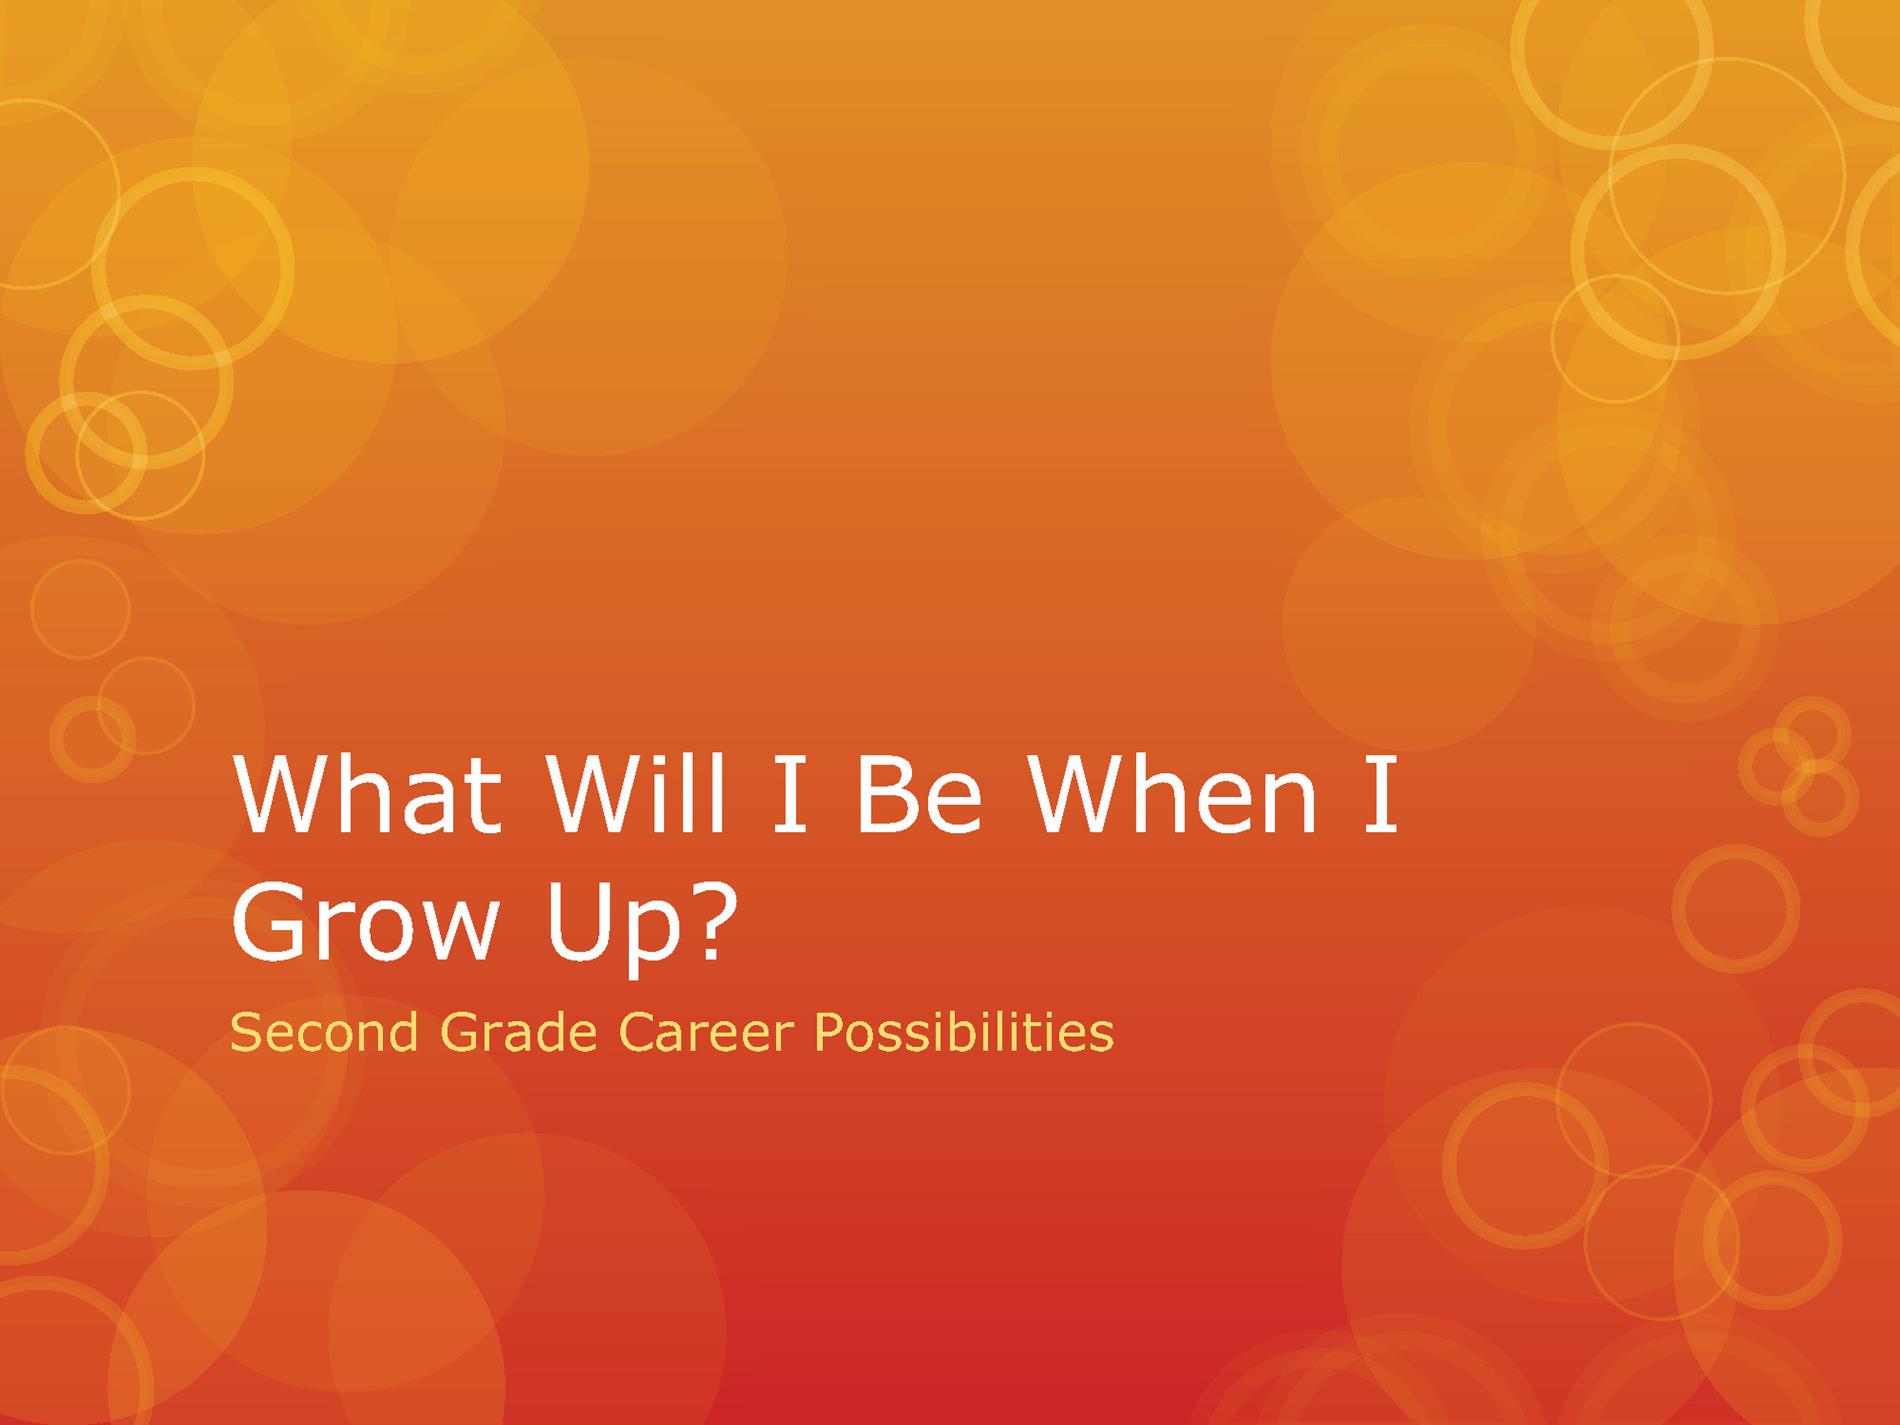 What Can I Be When I Grow Up - 2nd Grade